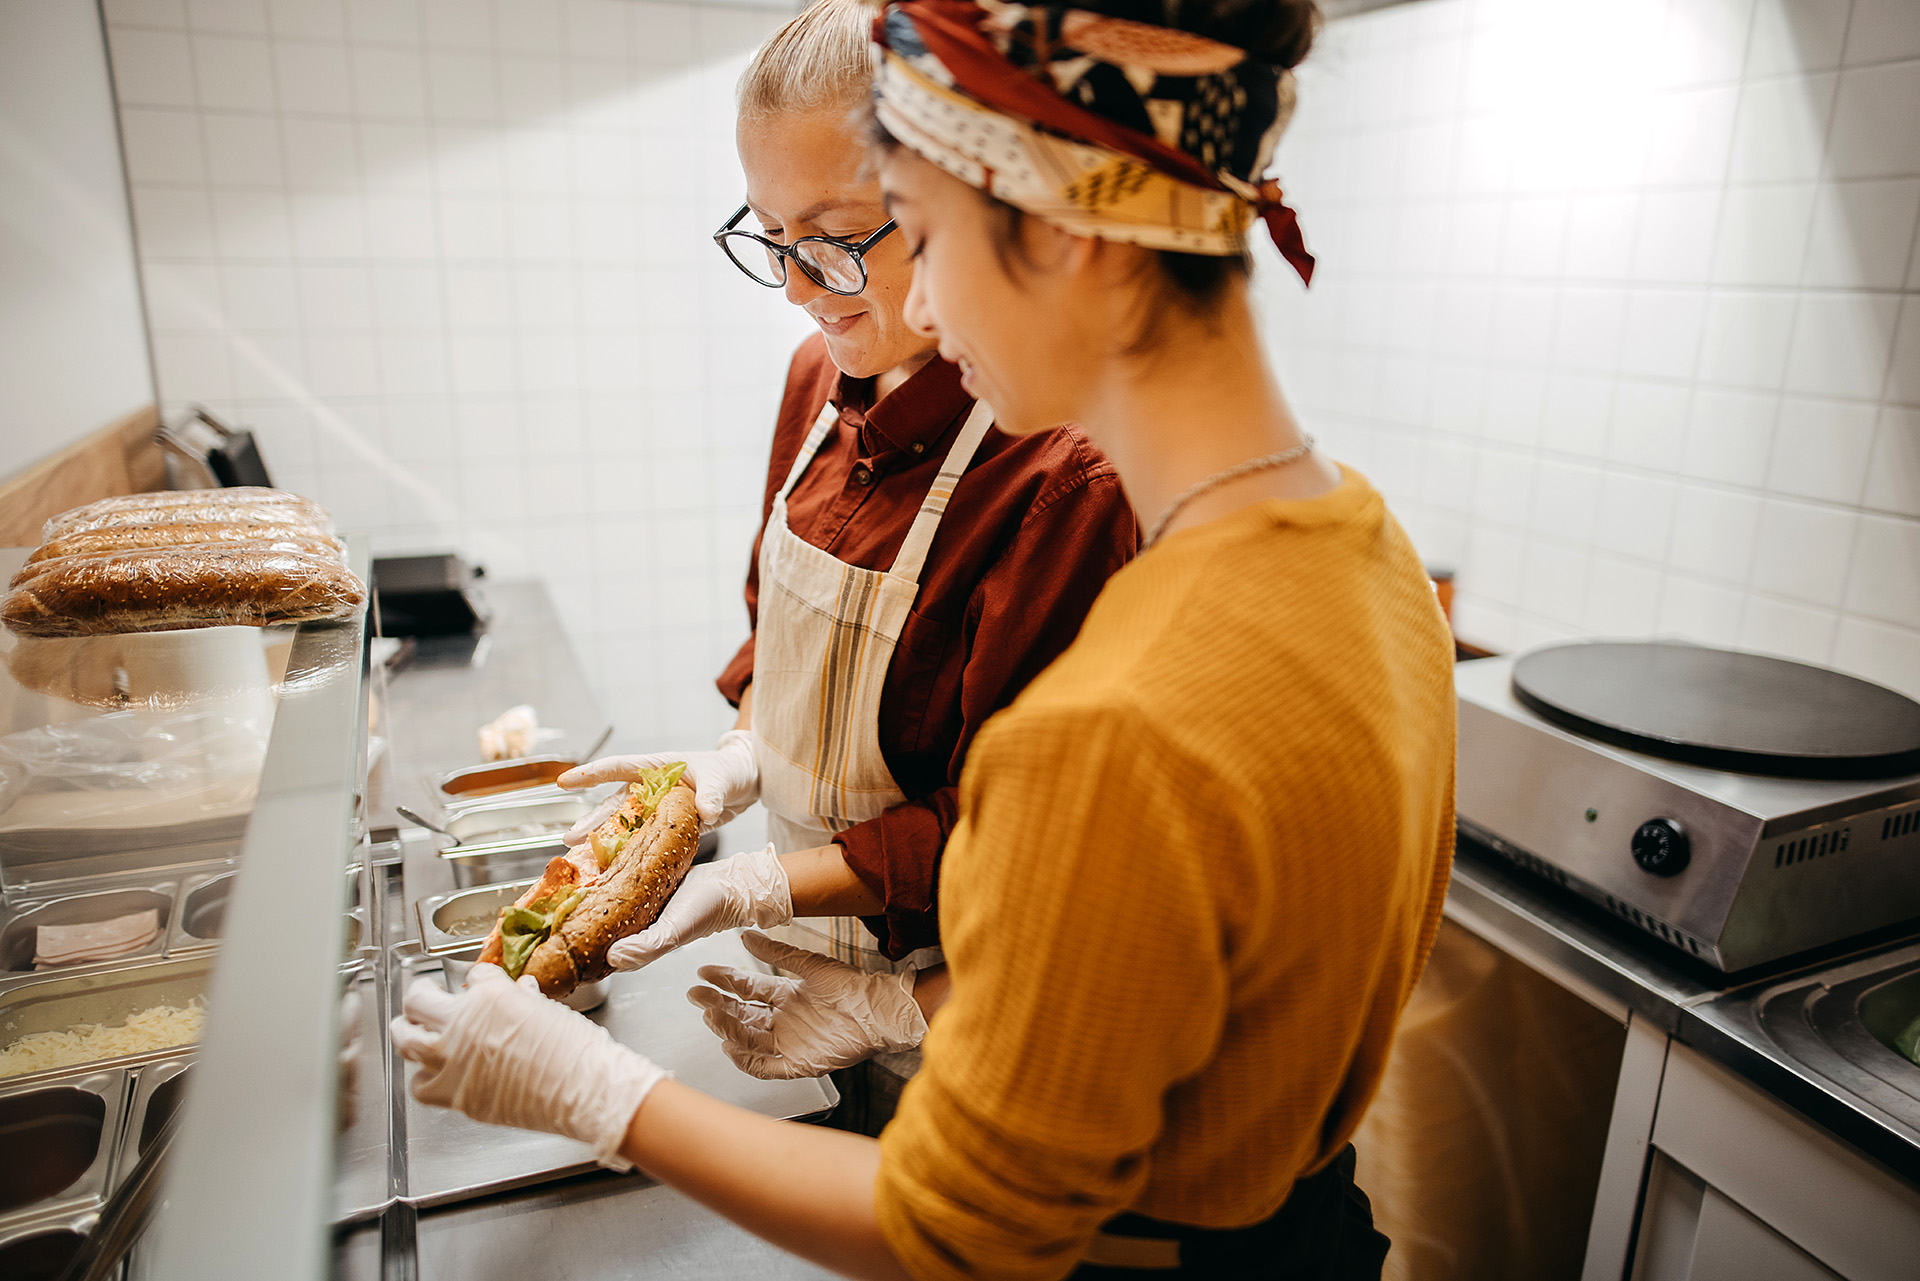 Two chefs making custom sandwich with artisan bread in a commercial kitchen